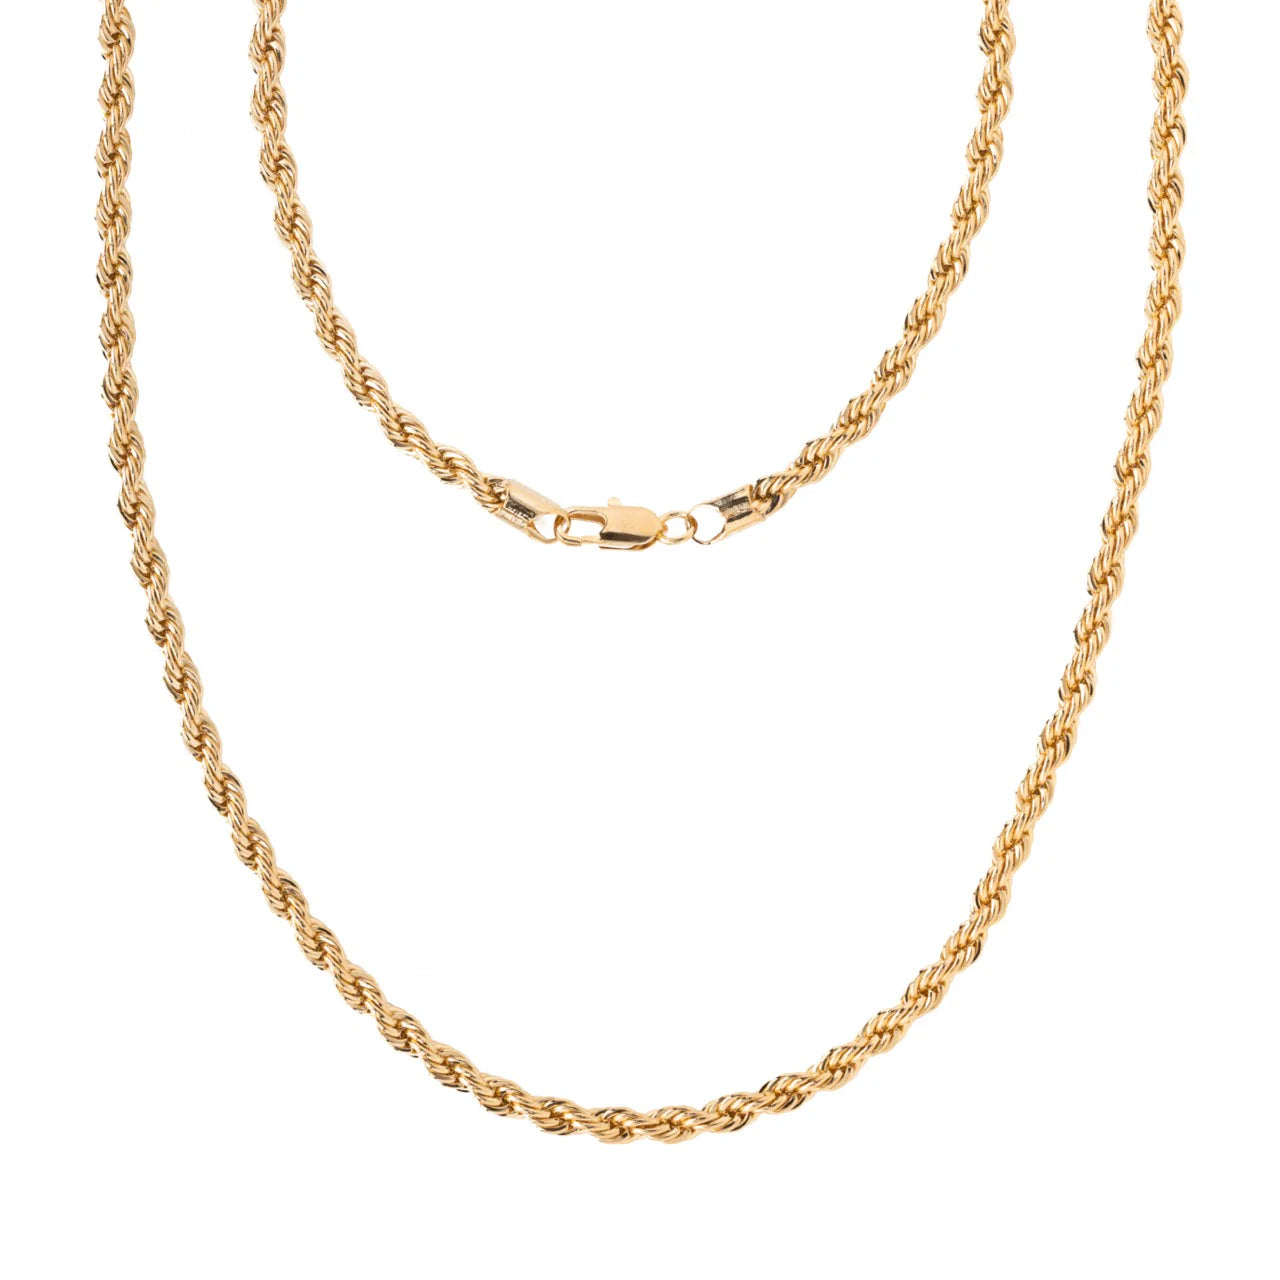 5MM GOLD ROPE CHAIN NECKLACE CLASSIC